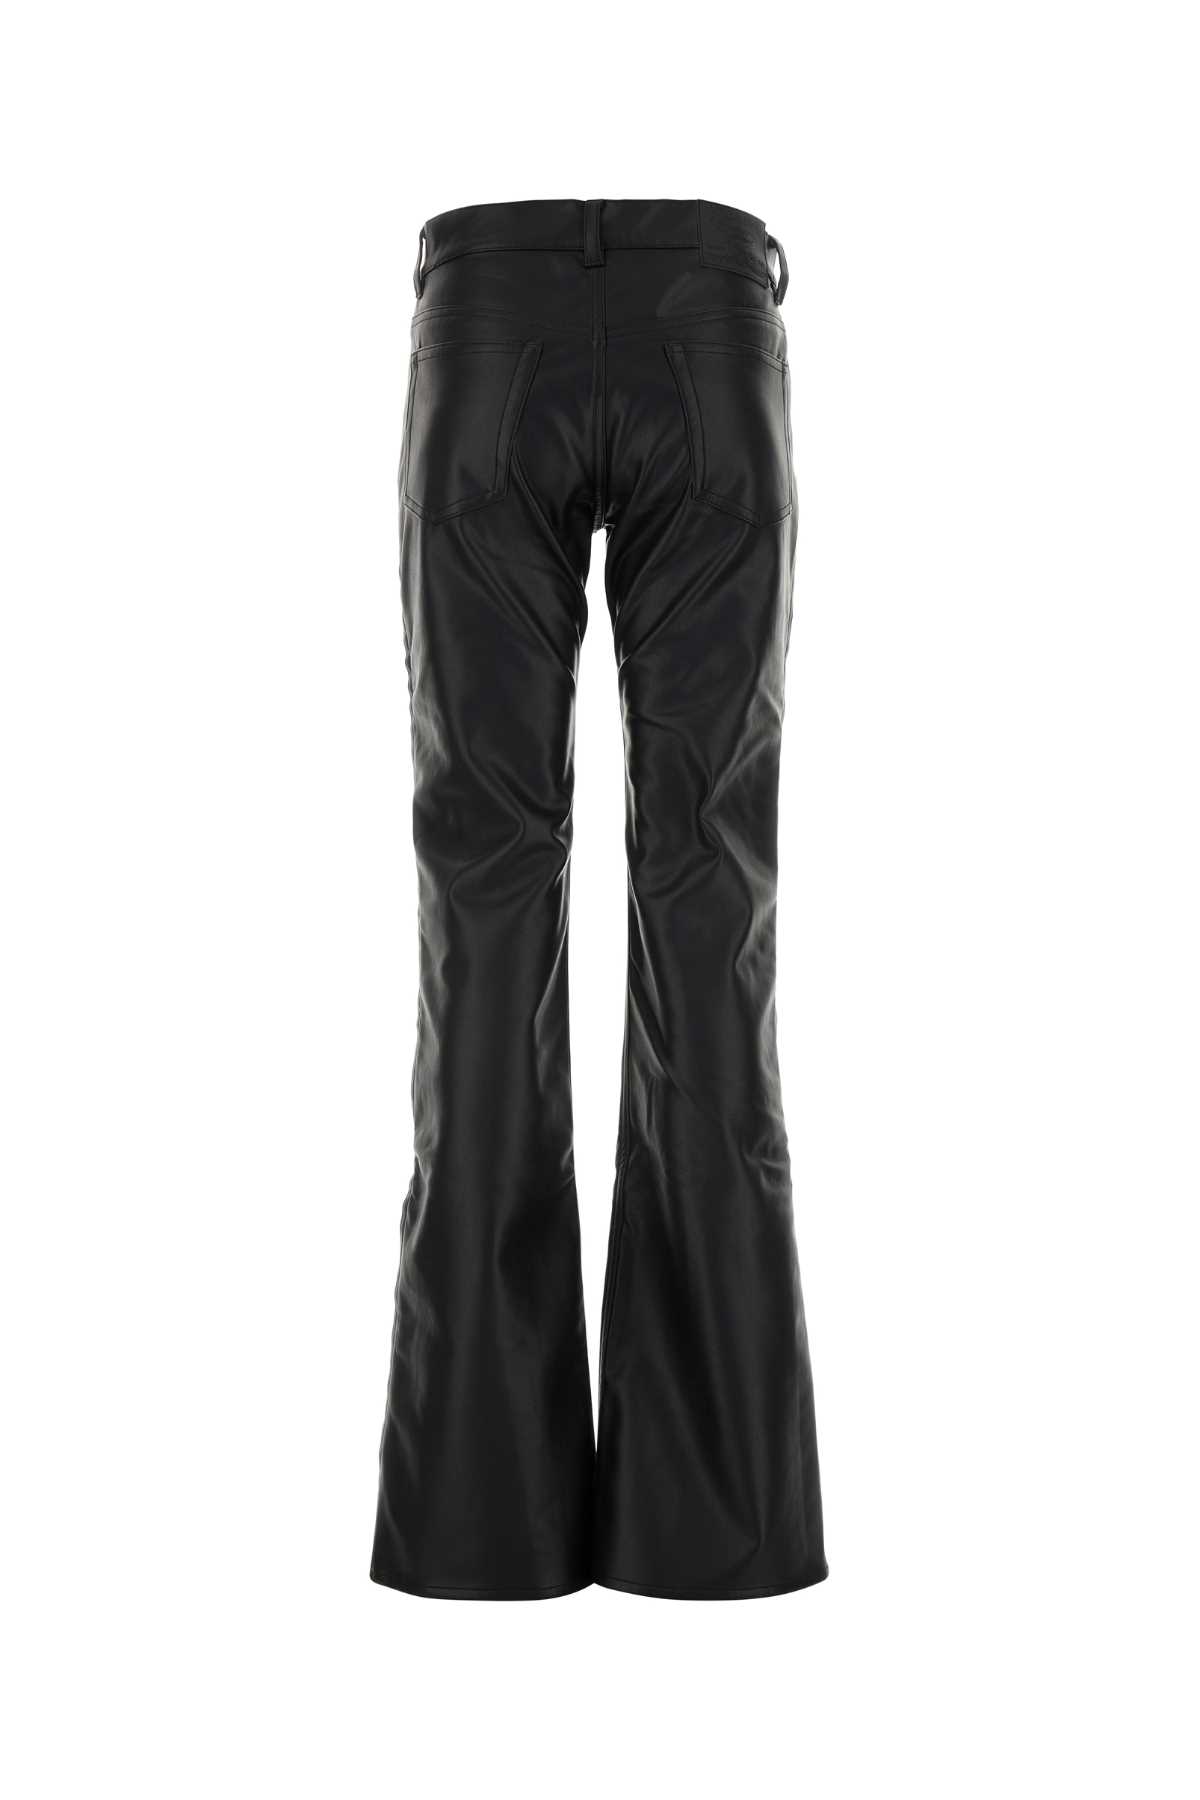 Y/project Black Synthetic Leather Pant